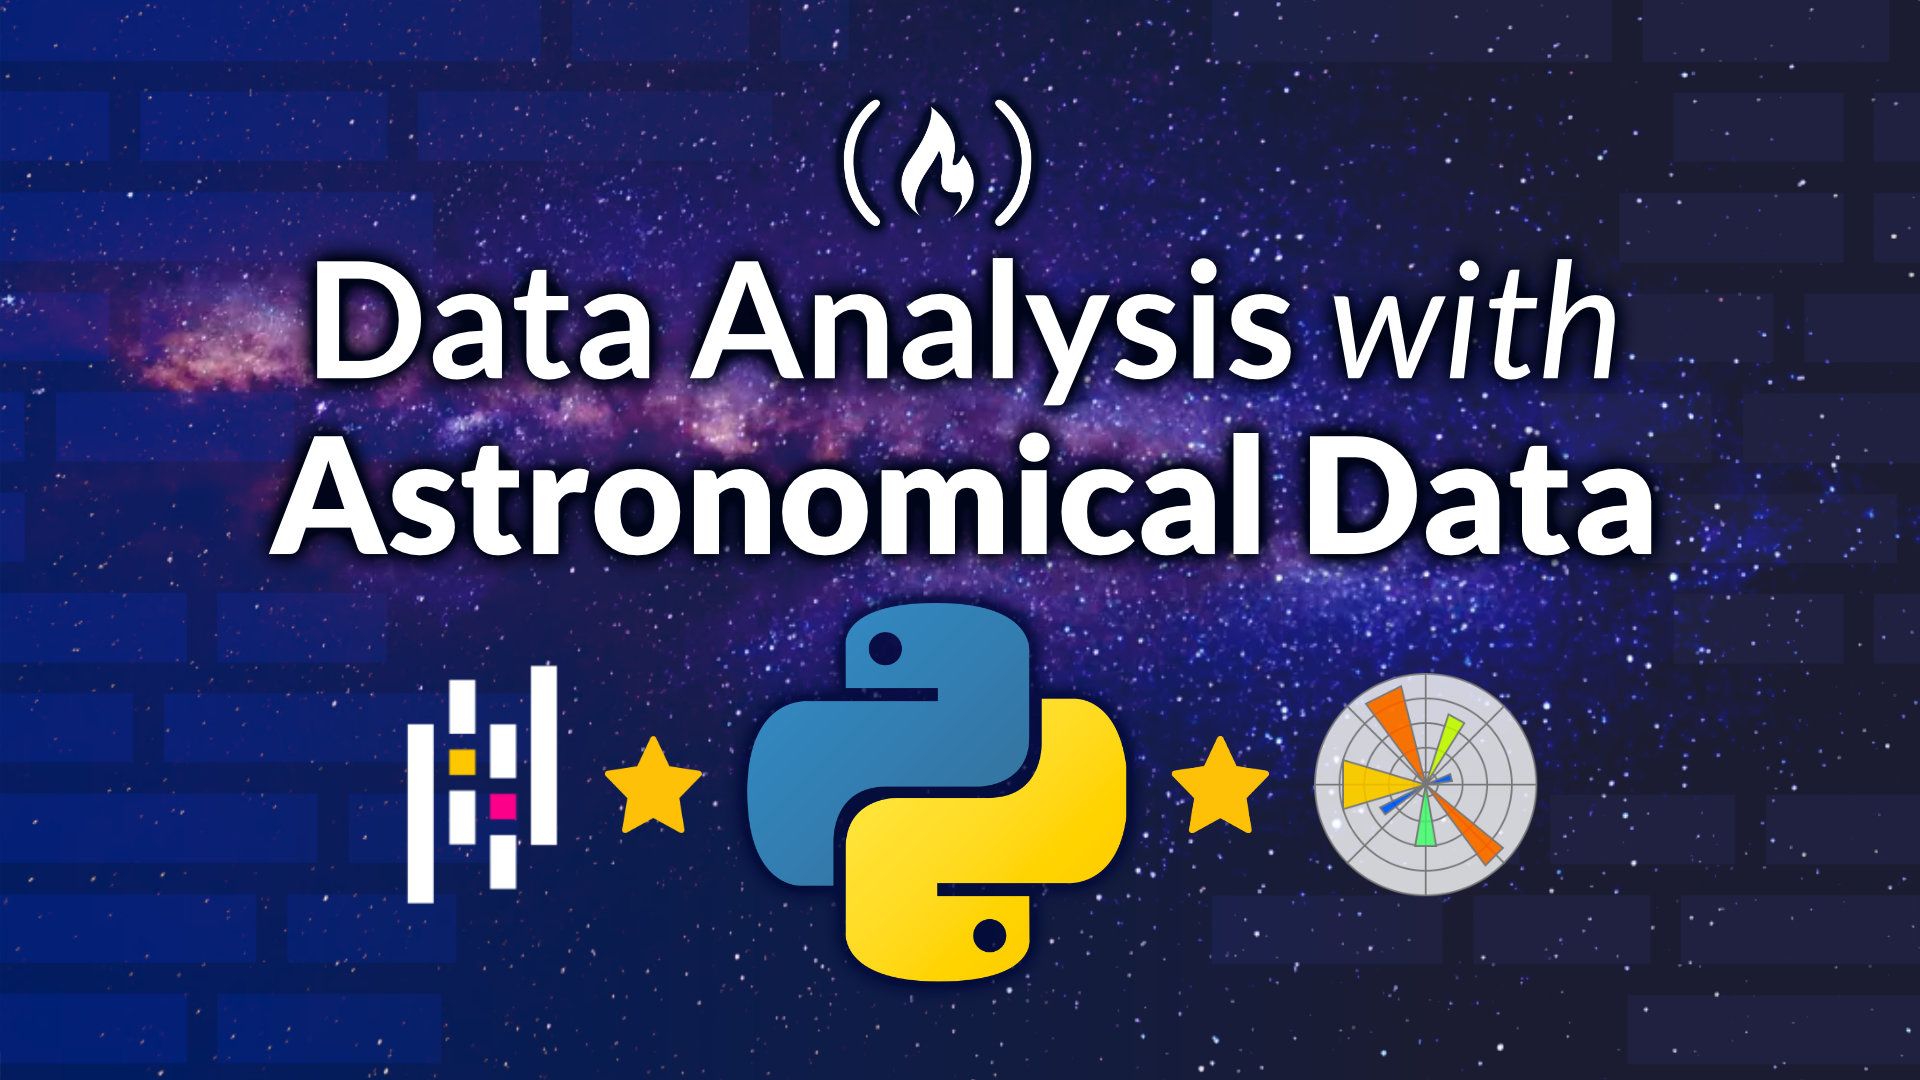 Learn Data Analysis and Visualization with Python Using Astronomical Data